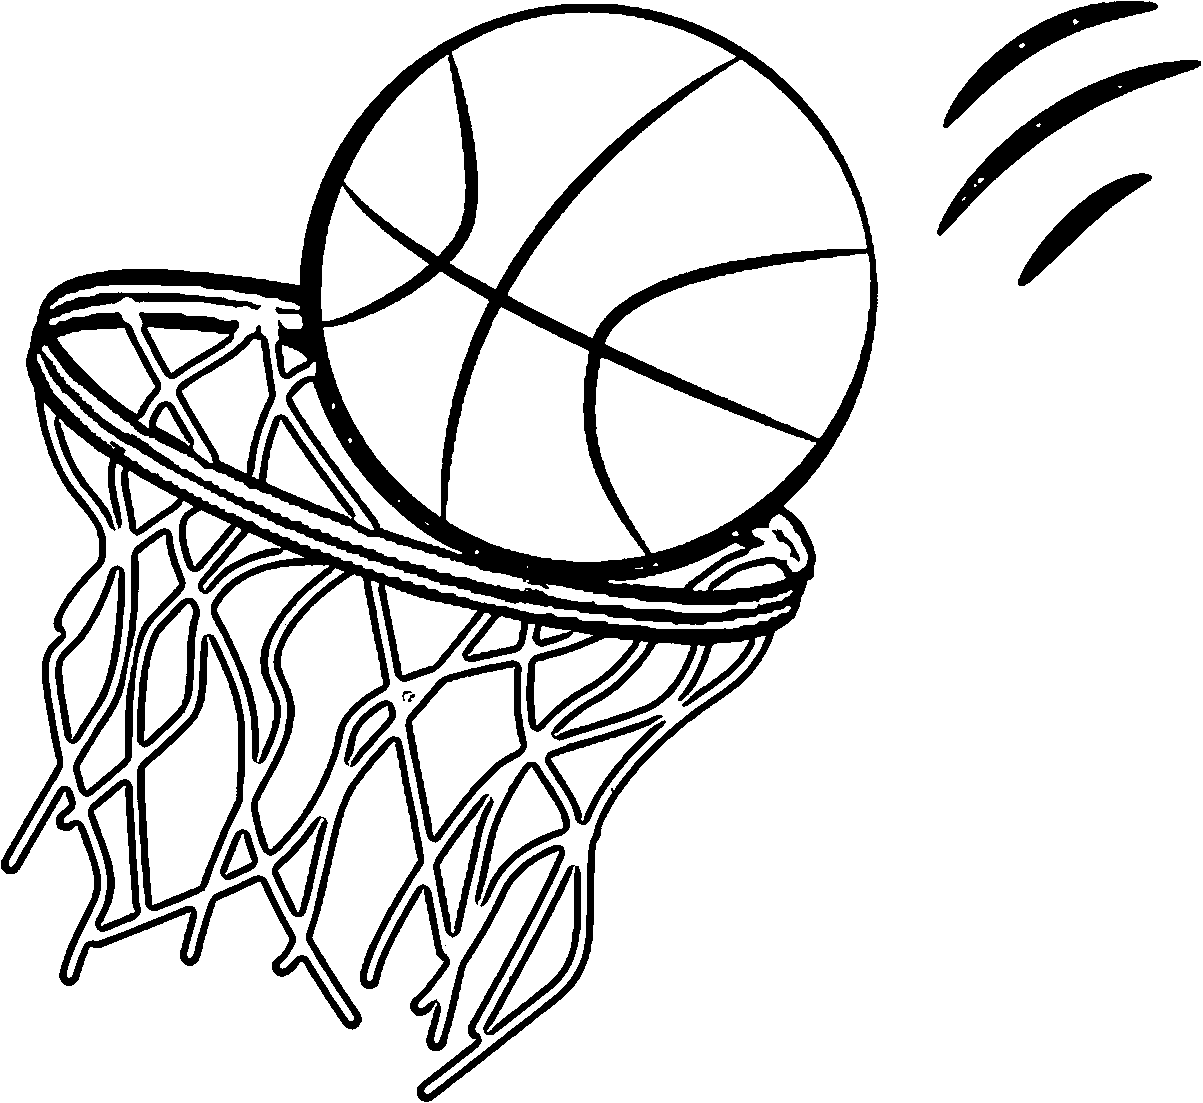 Download 30 Free Printable Basketball Coloring Pages